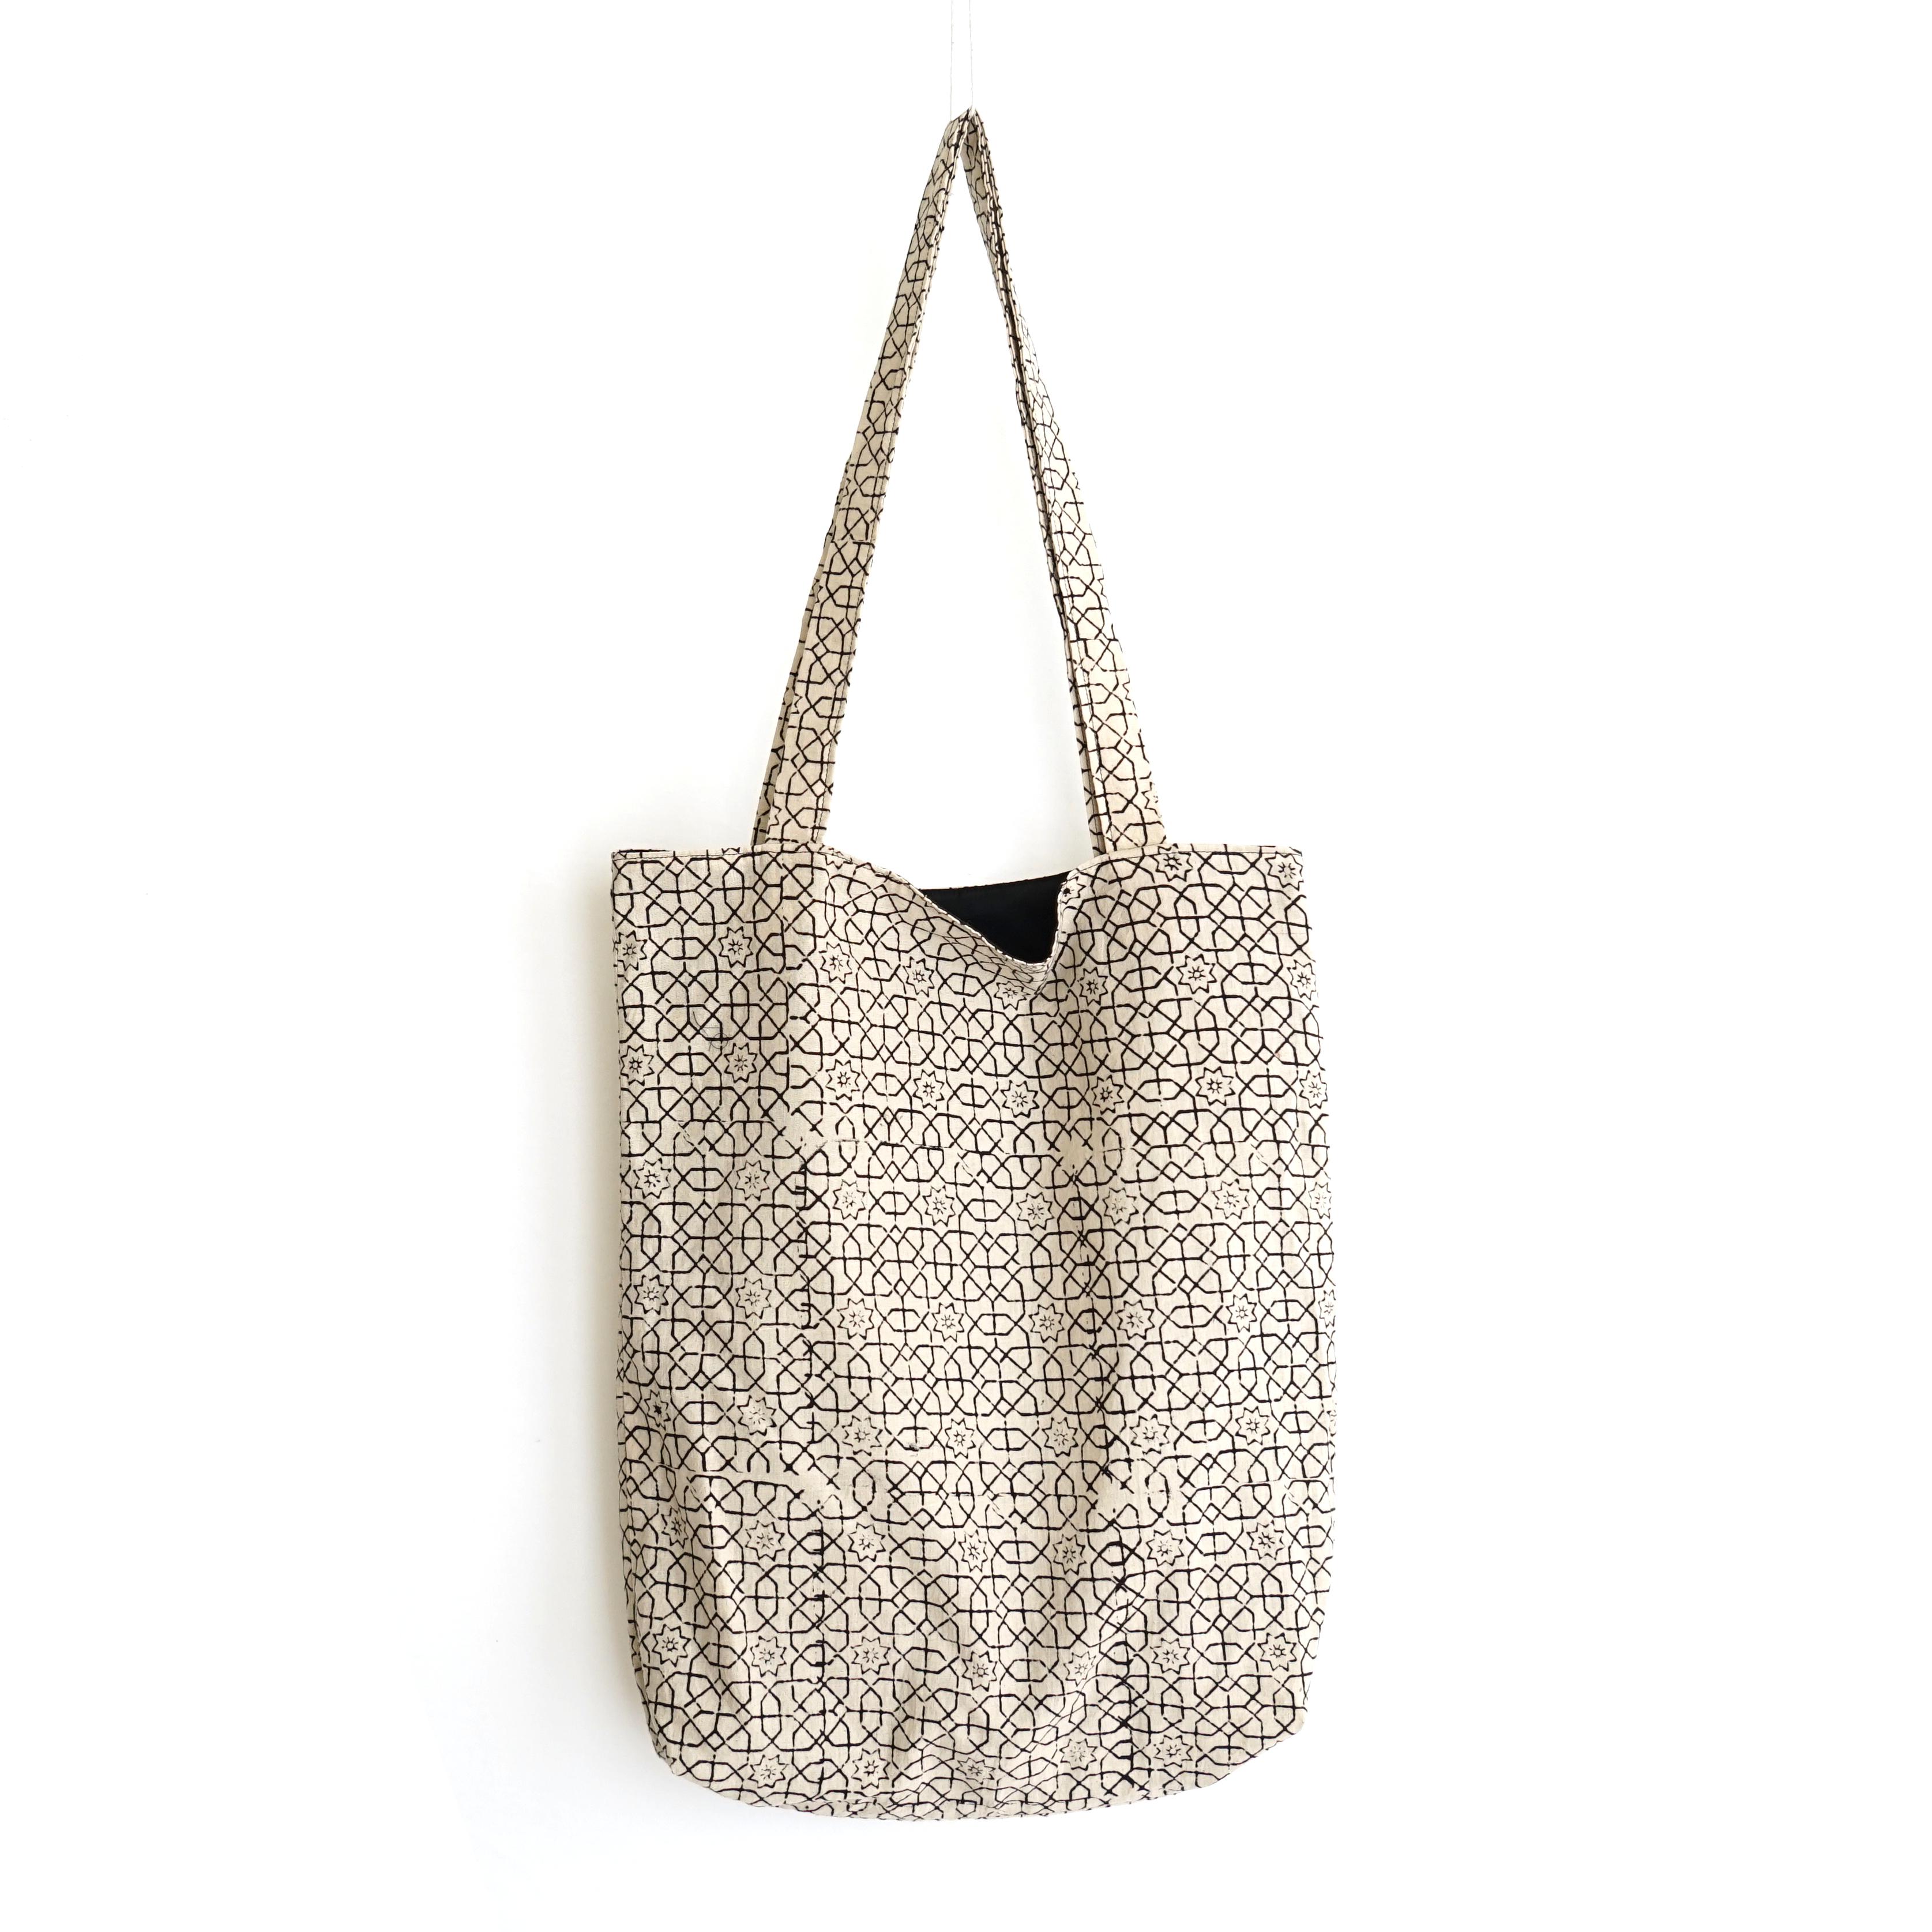 block printed cotton tote bag, natural dye, beige, black octagon design, lined with black cotton, open